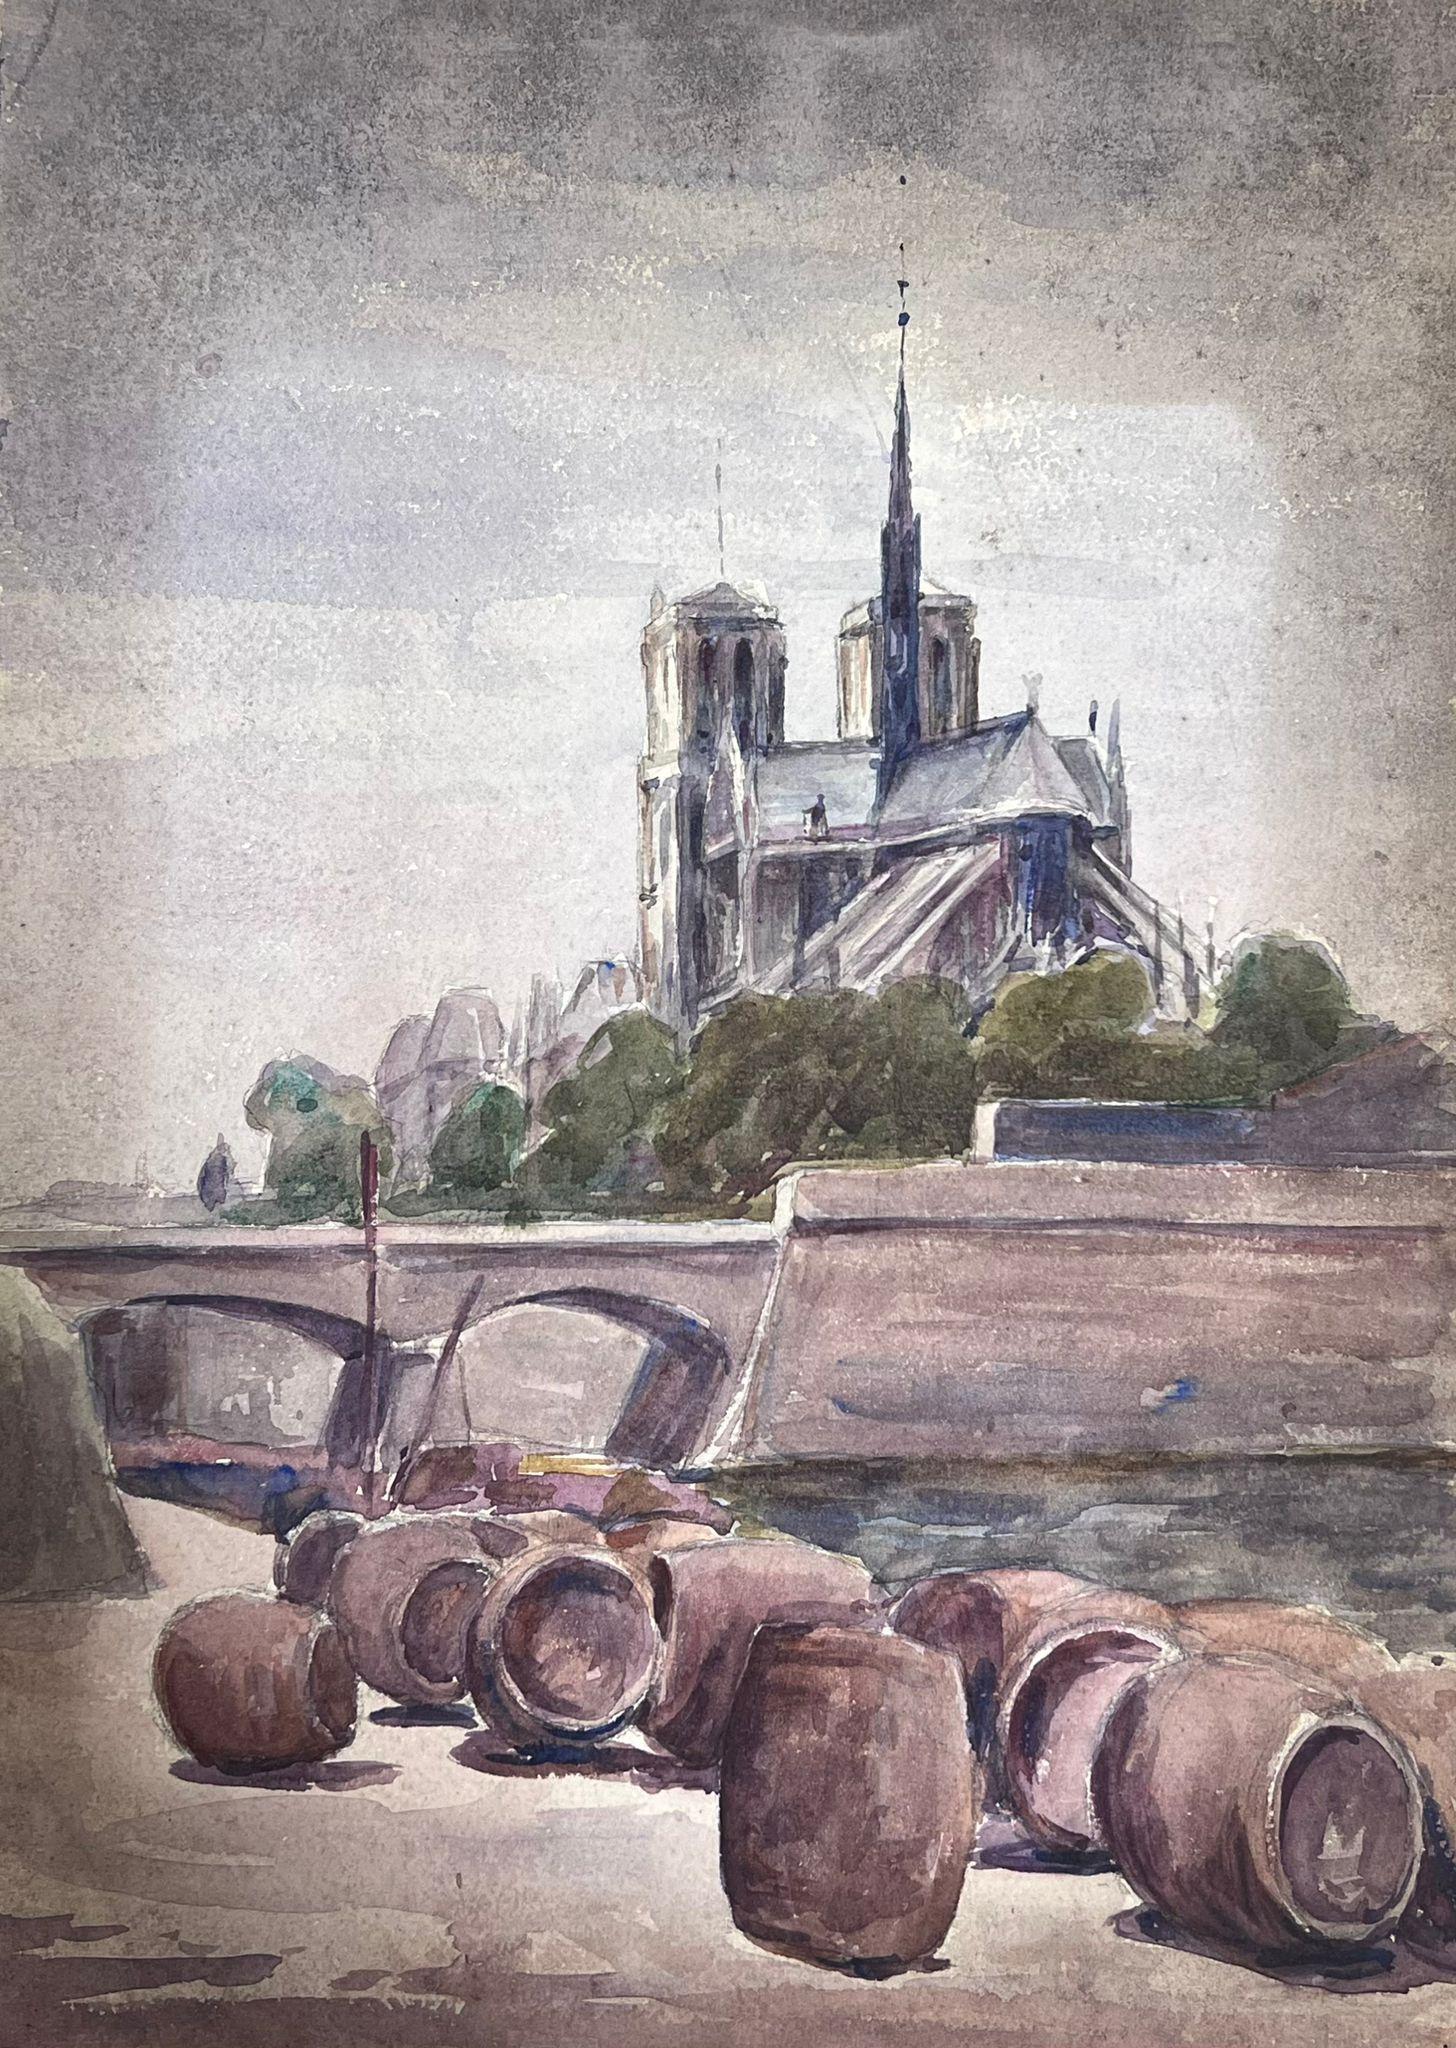 Parisian Landscape
by Louise Alix, French 1950's Impressionist 
watercolour on artist paper, unframed
painting: 13.75 x 10 inches
provenance: from a large private collection of this artists work in Northern France
condition: original, good and sound